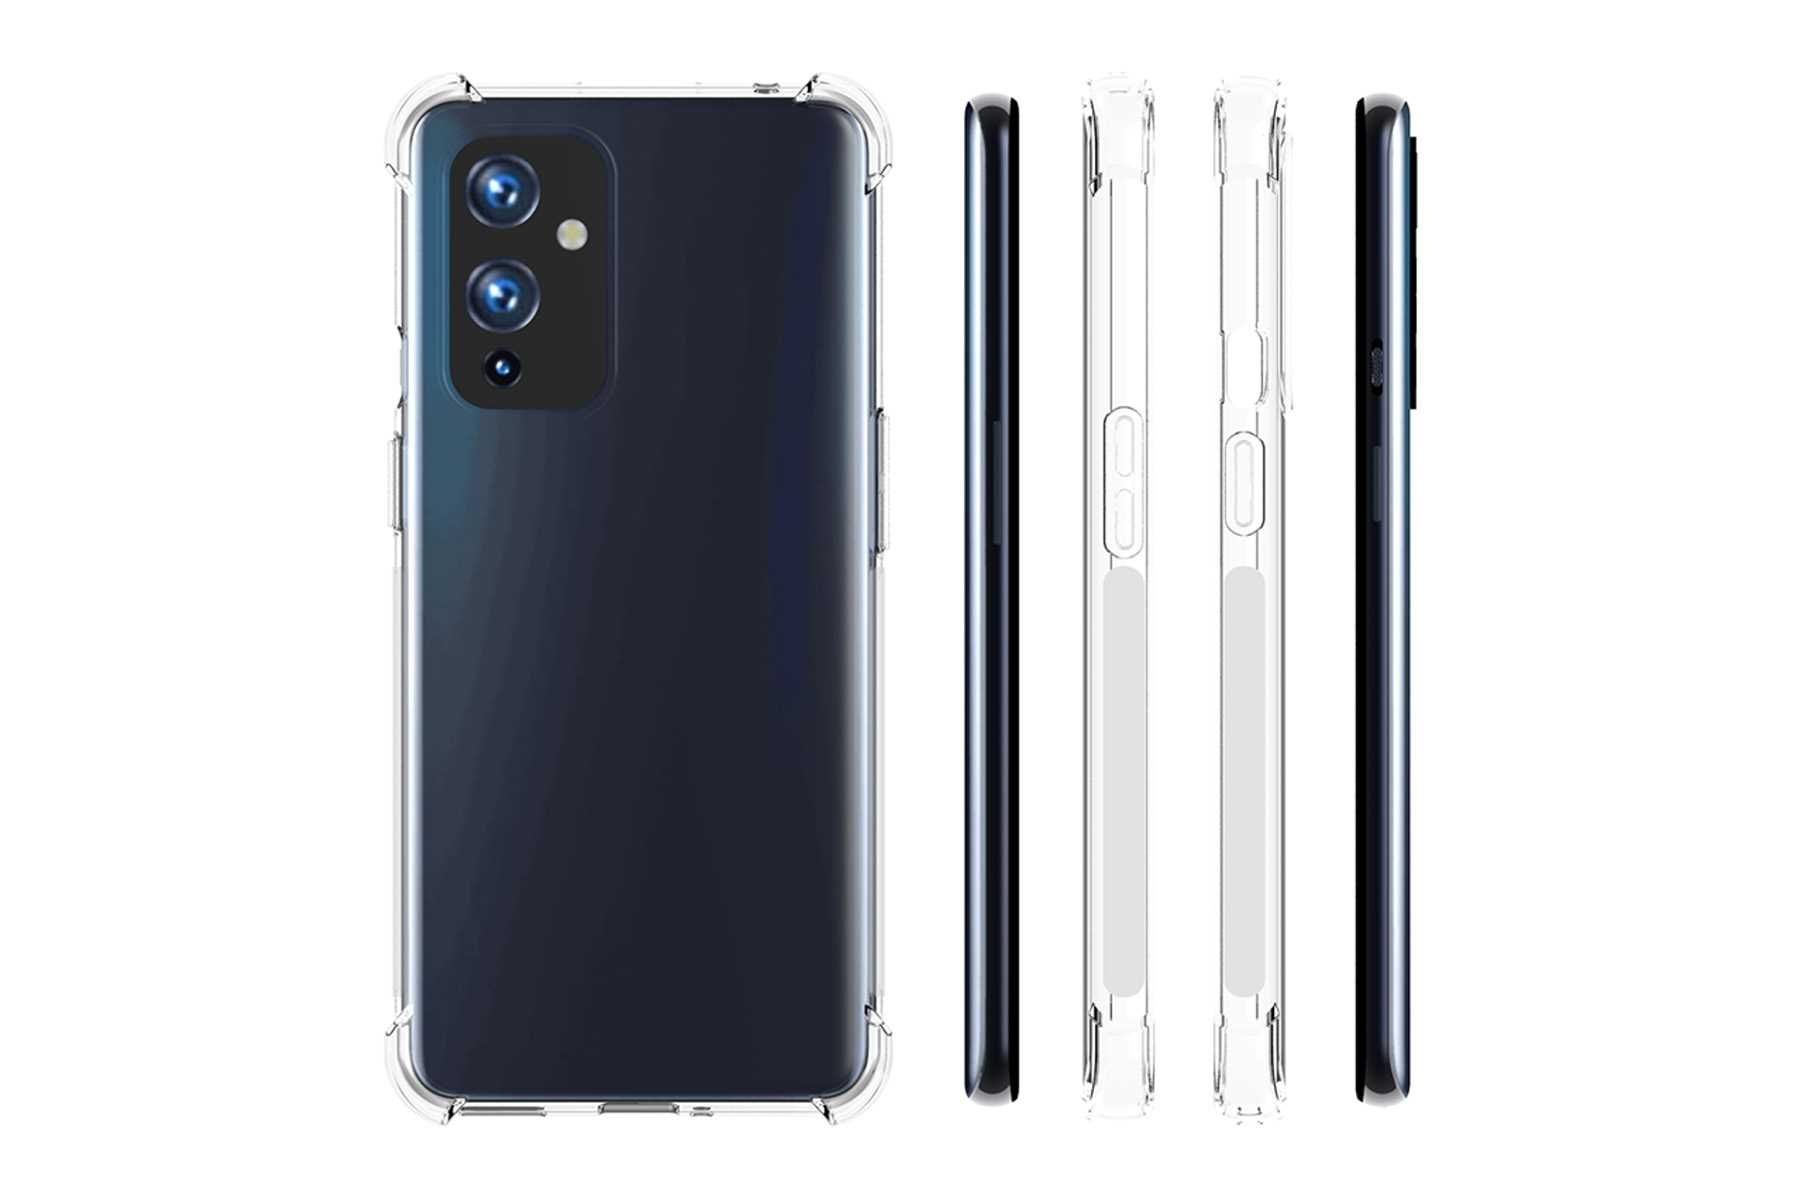 Transparent 9, OnePlus, Clear MTB Backcover, ENERGY Case, Armor MORE